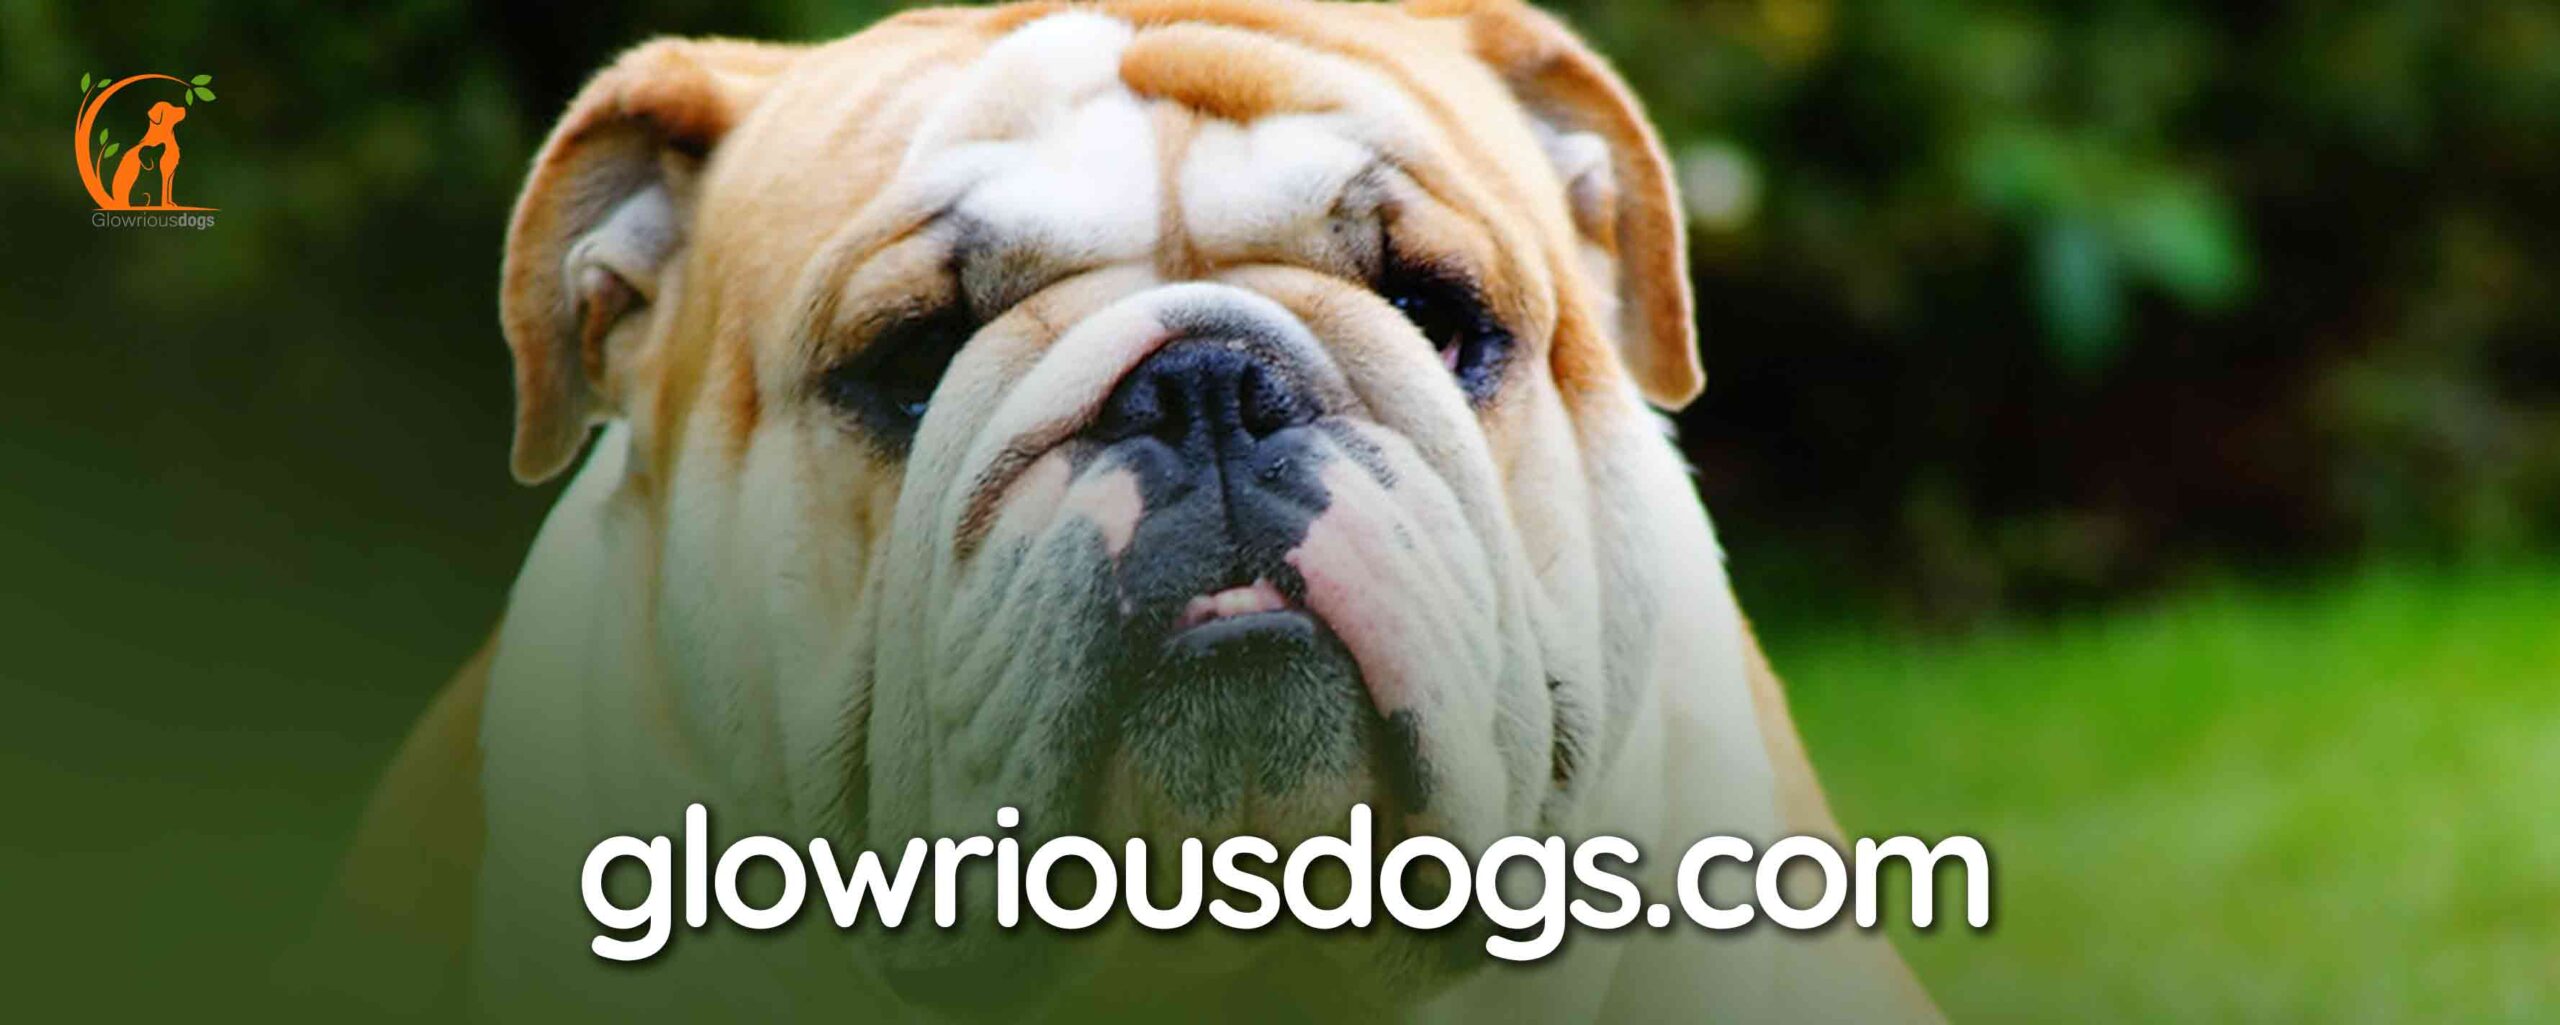 When Do English Bulldogs Get Their Wrinkles: Key Stages & Prevention